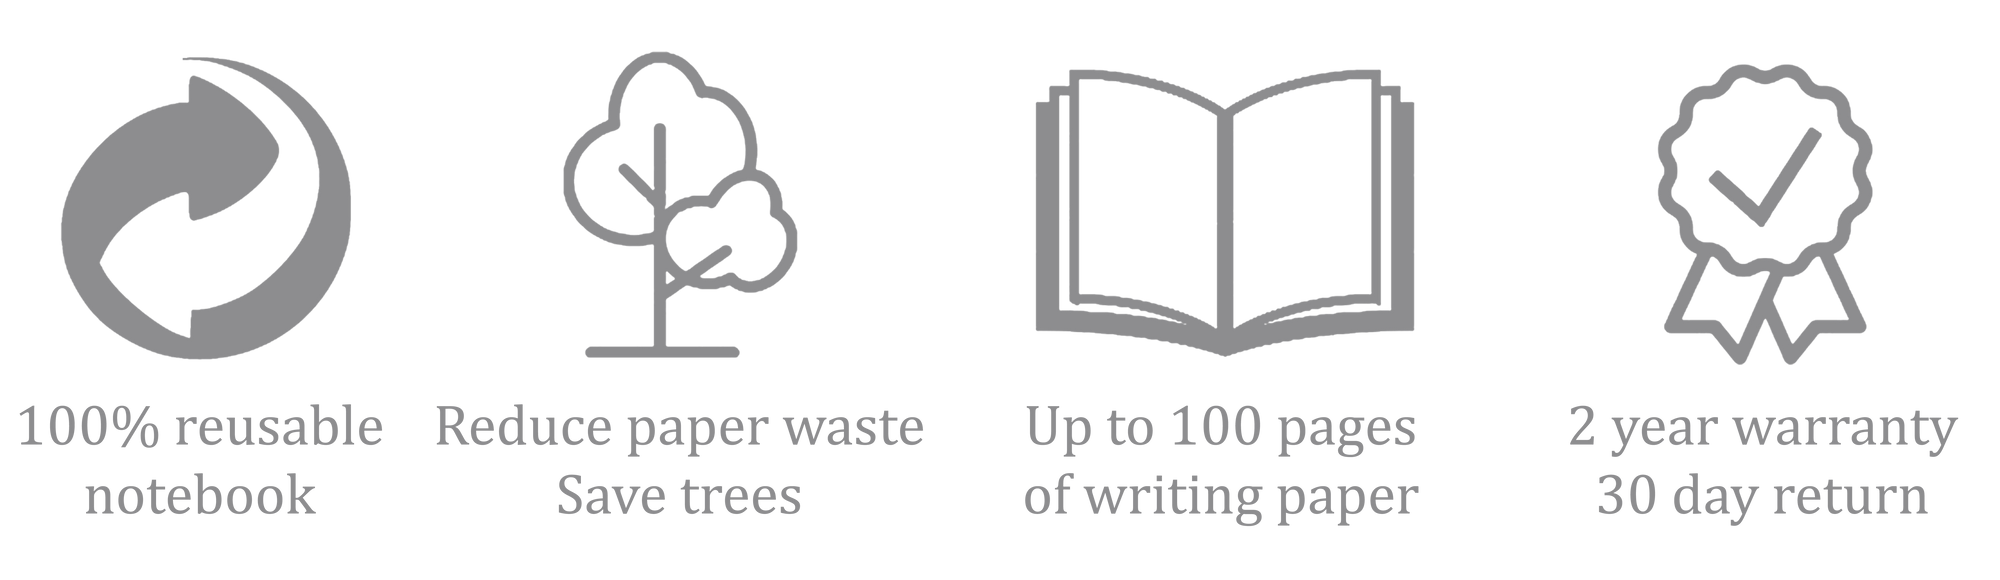 Reusable notebook to reduce waste, save trees with 2 year warranty